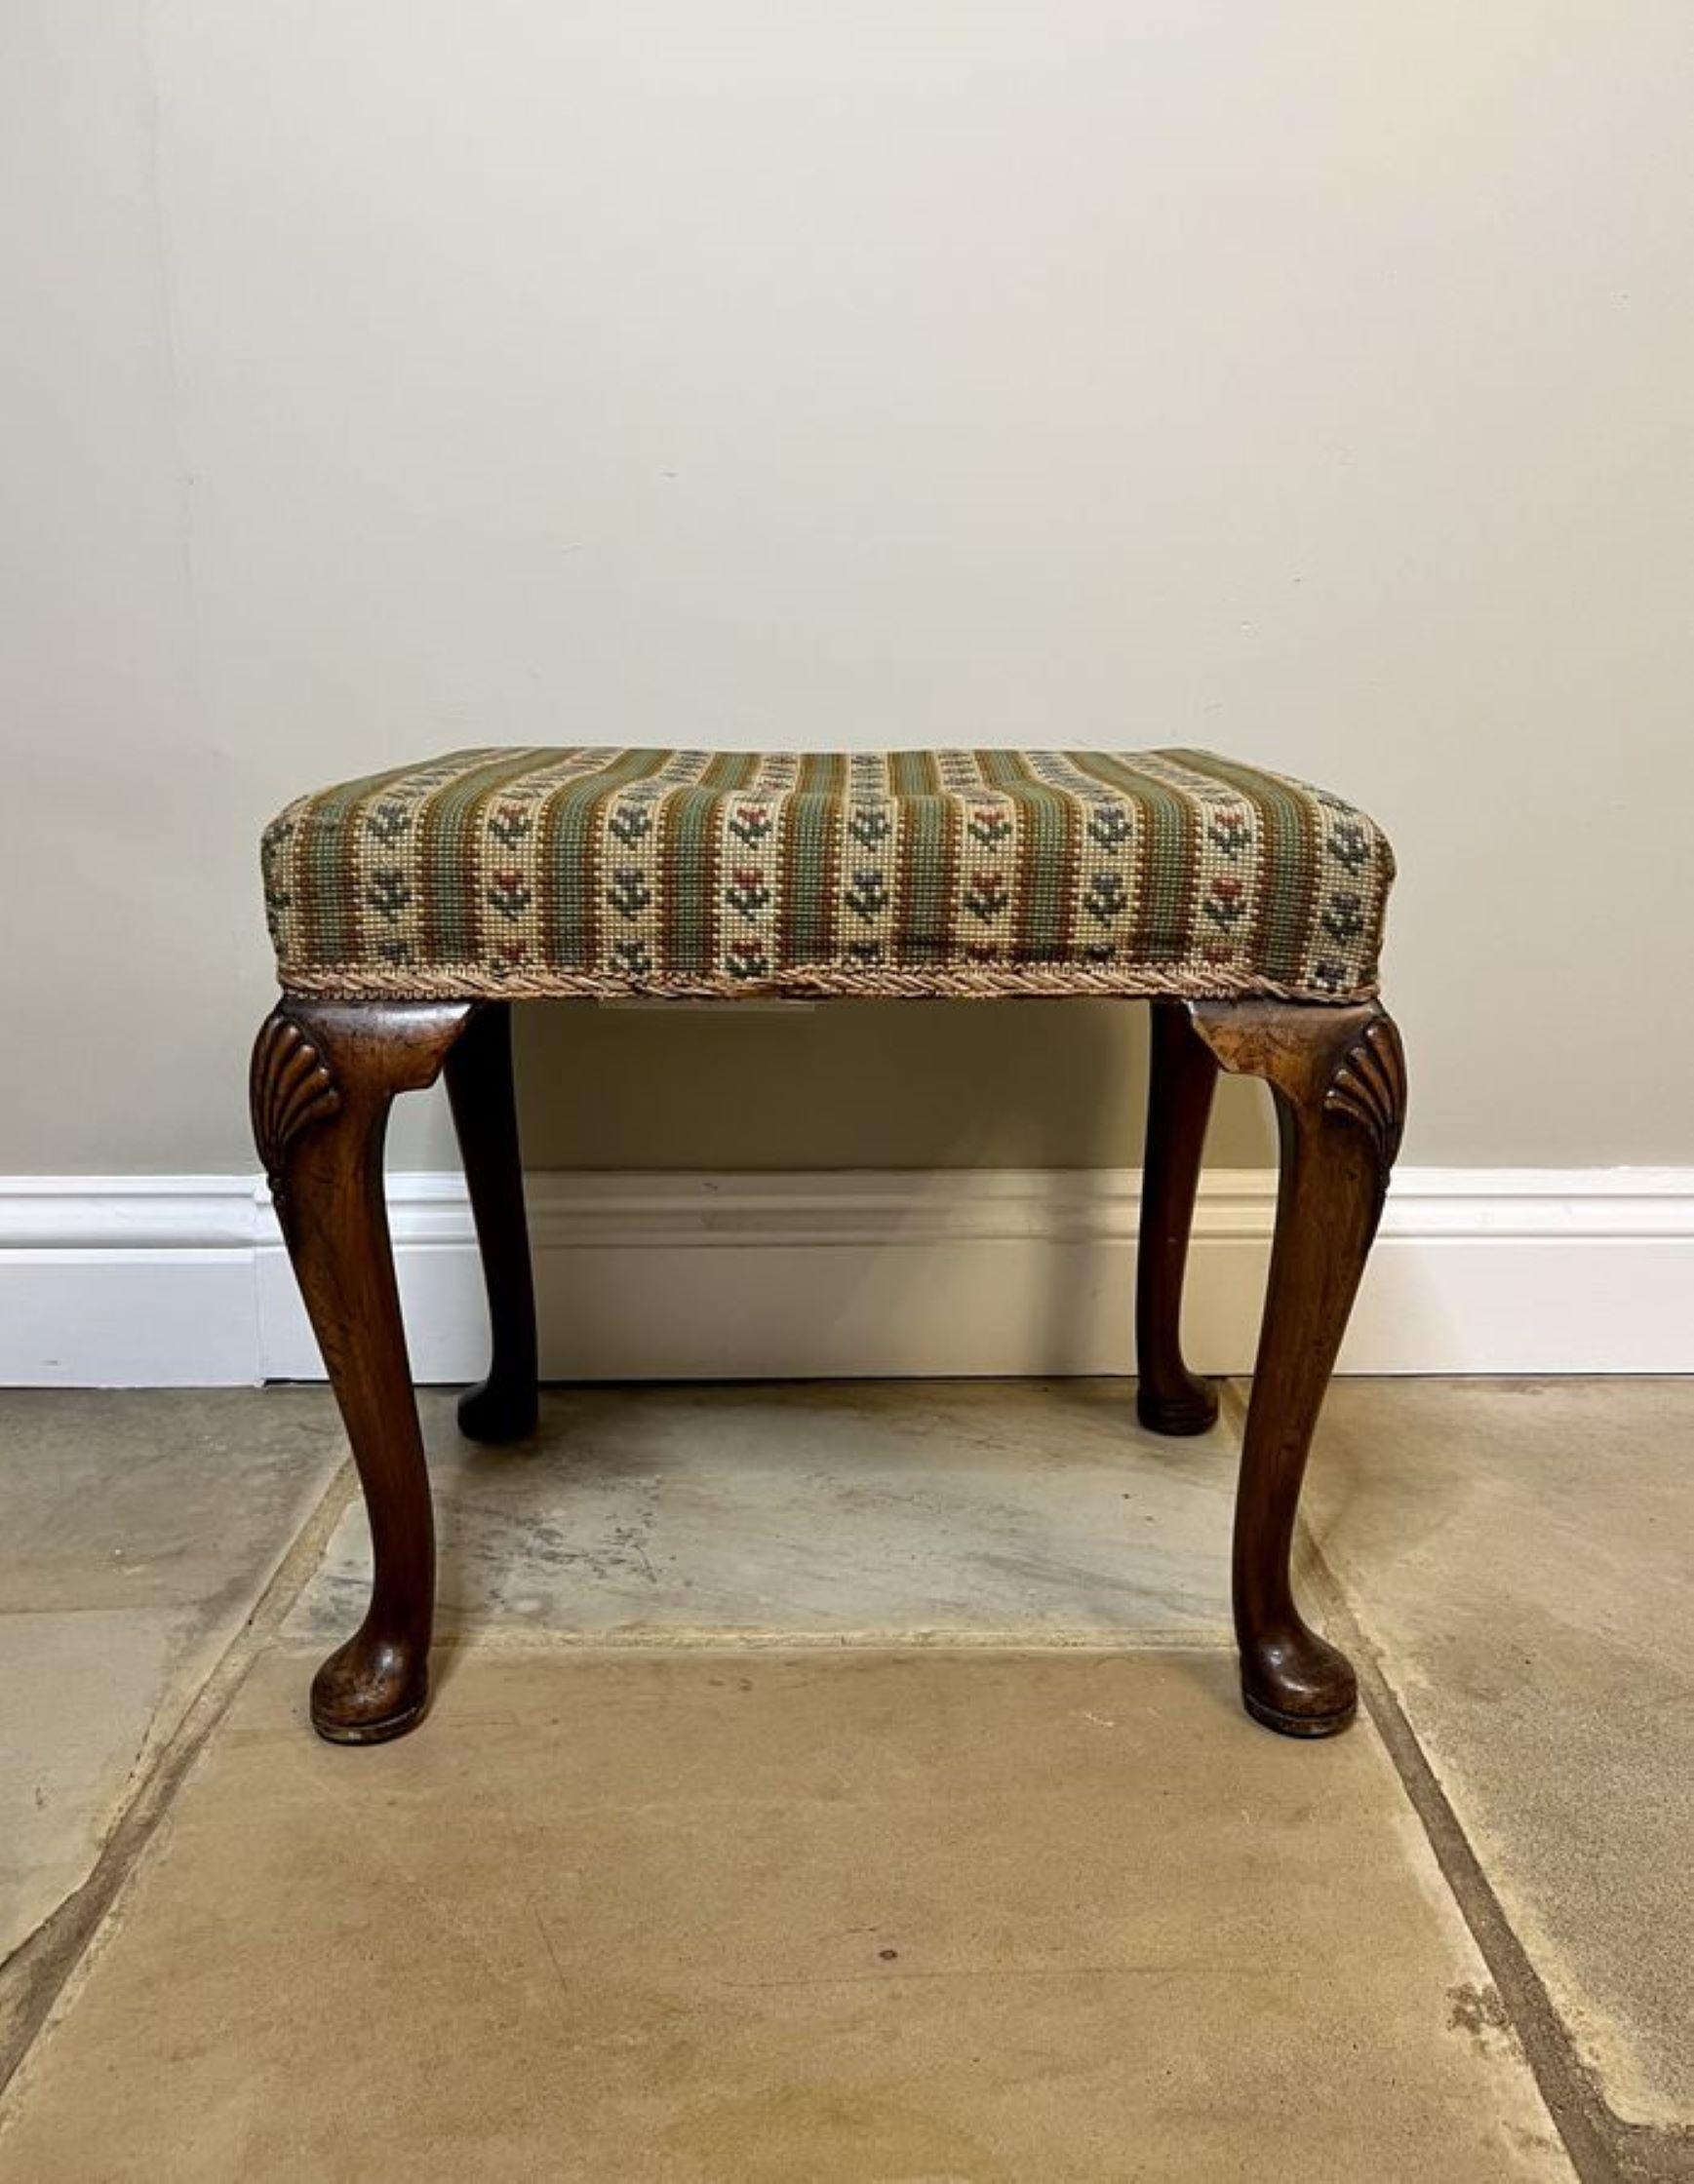 Quality antique Victorian carved walnut stool having a holstered seat supported by four quality carved walnut shaped cabriole legs with pad feet.

D. 1880